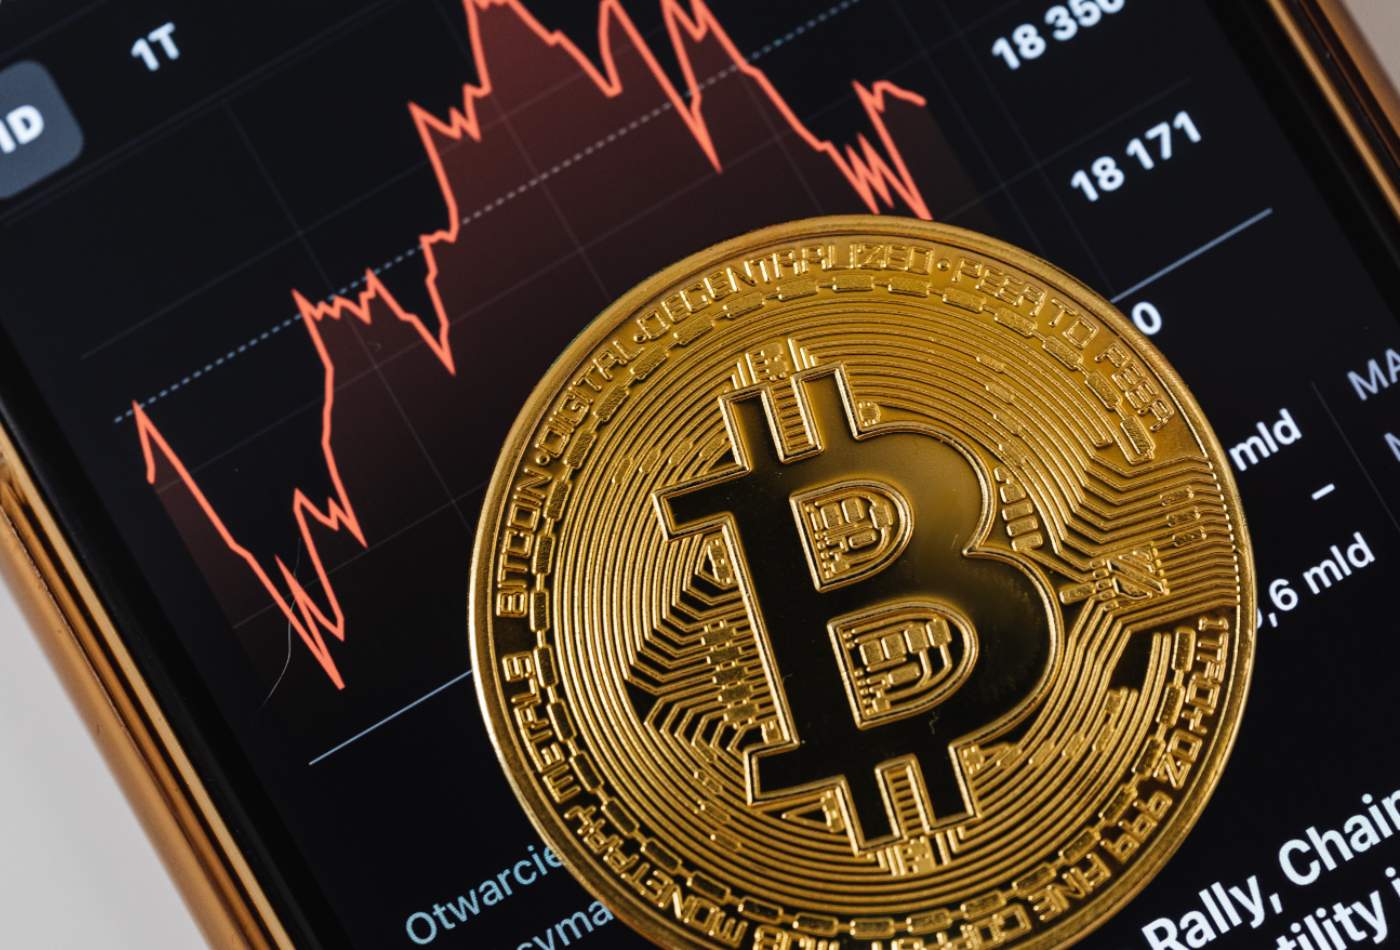 Bitcoin (BTC) Price Prediction 2022-2030: Why Is It Going Down?